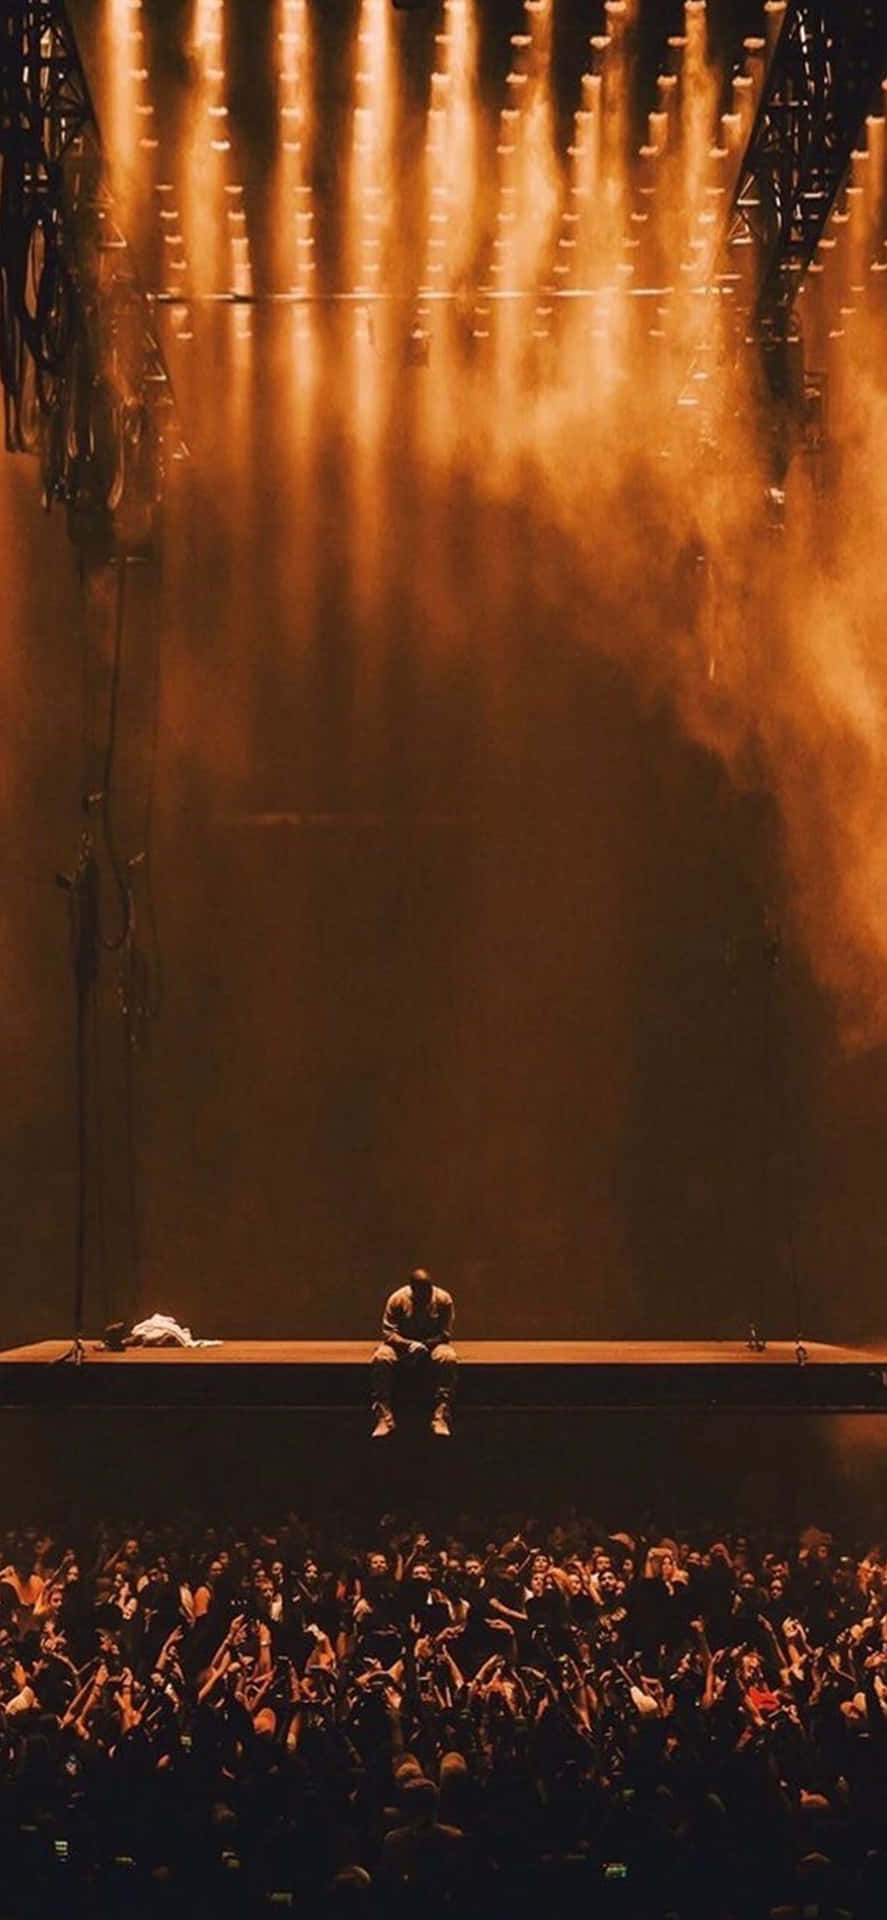 Iconic Rapper Kanye West In Thoughtful Pose